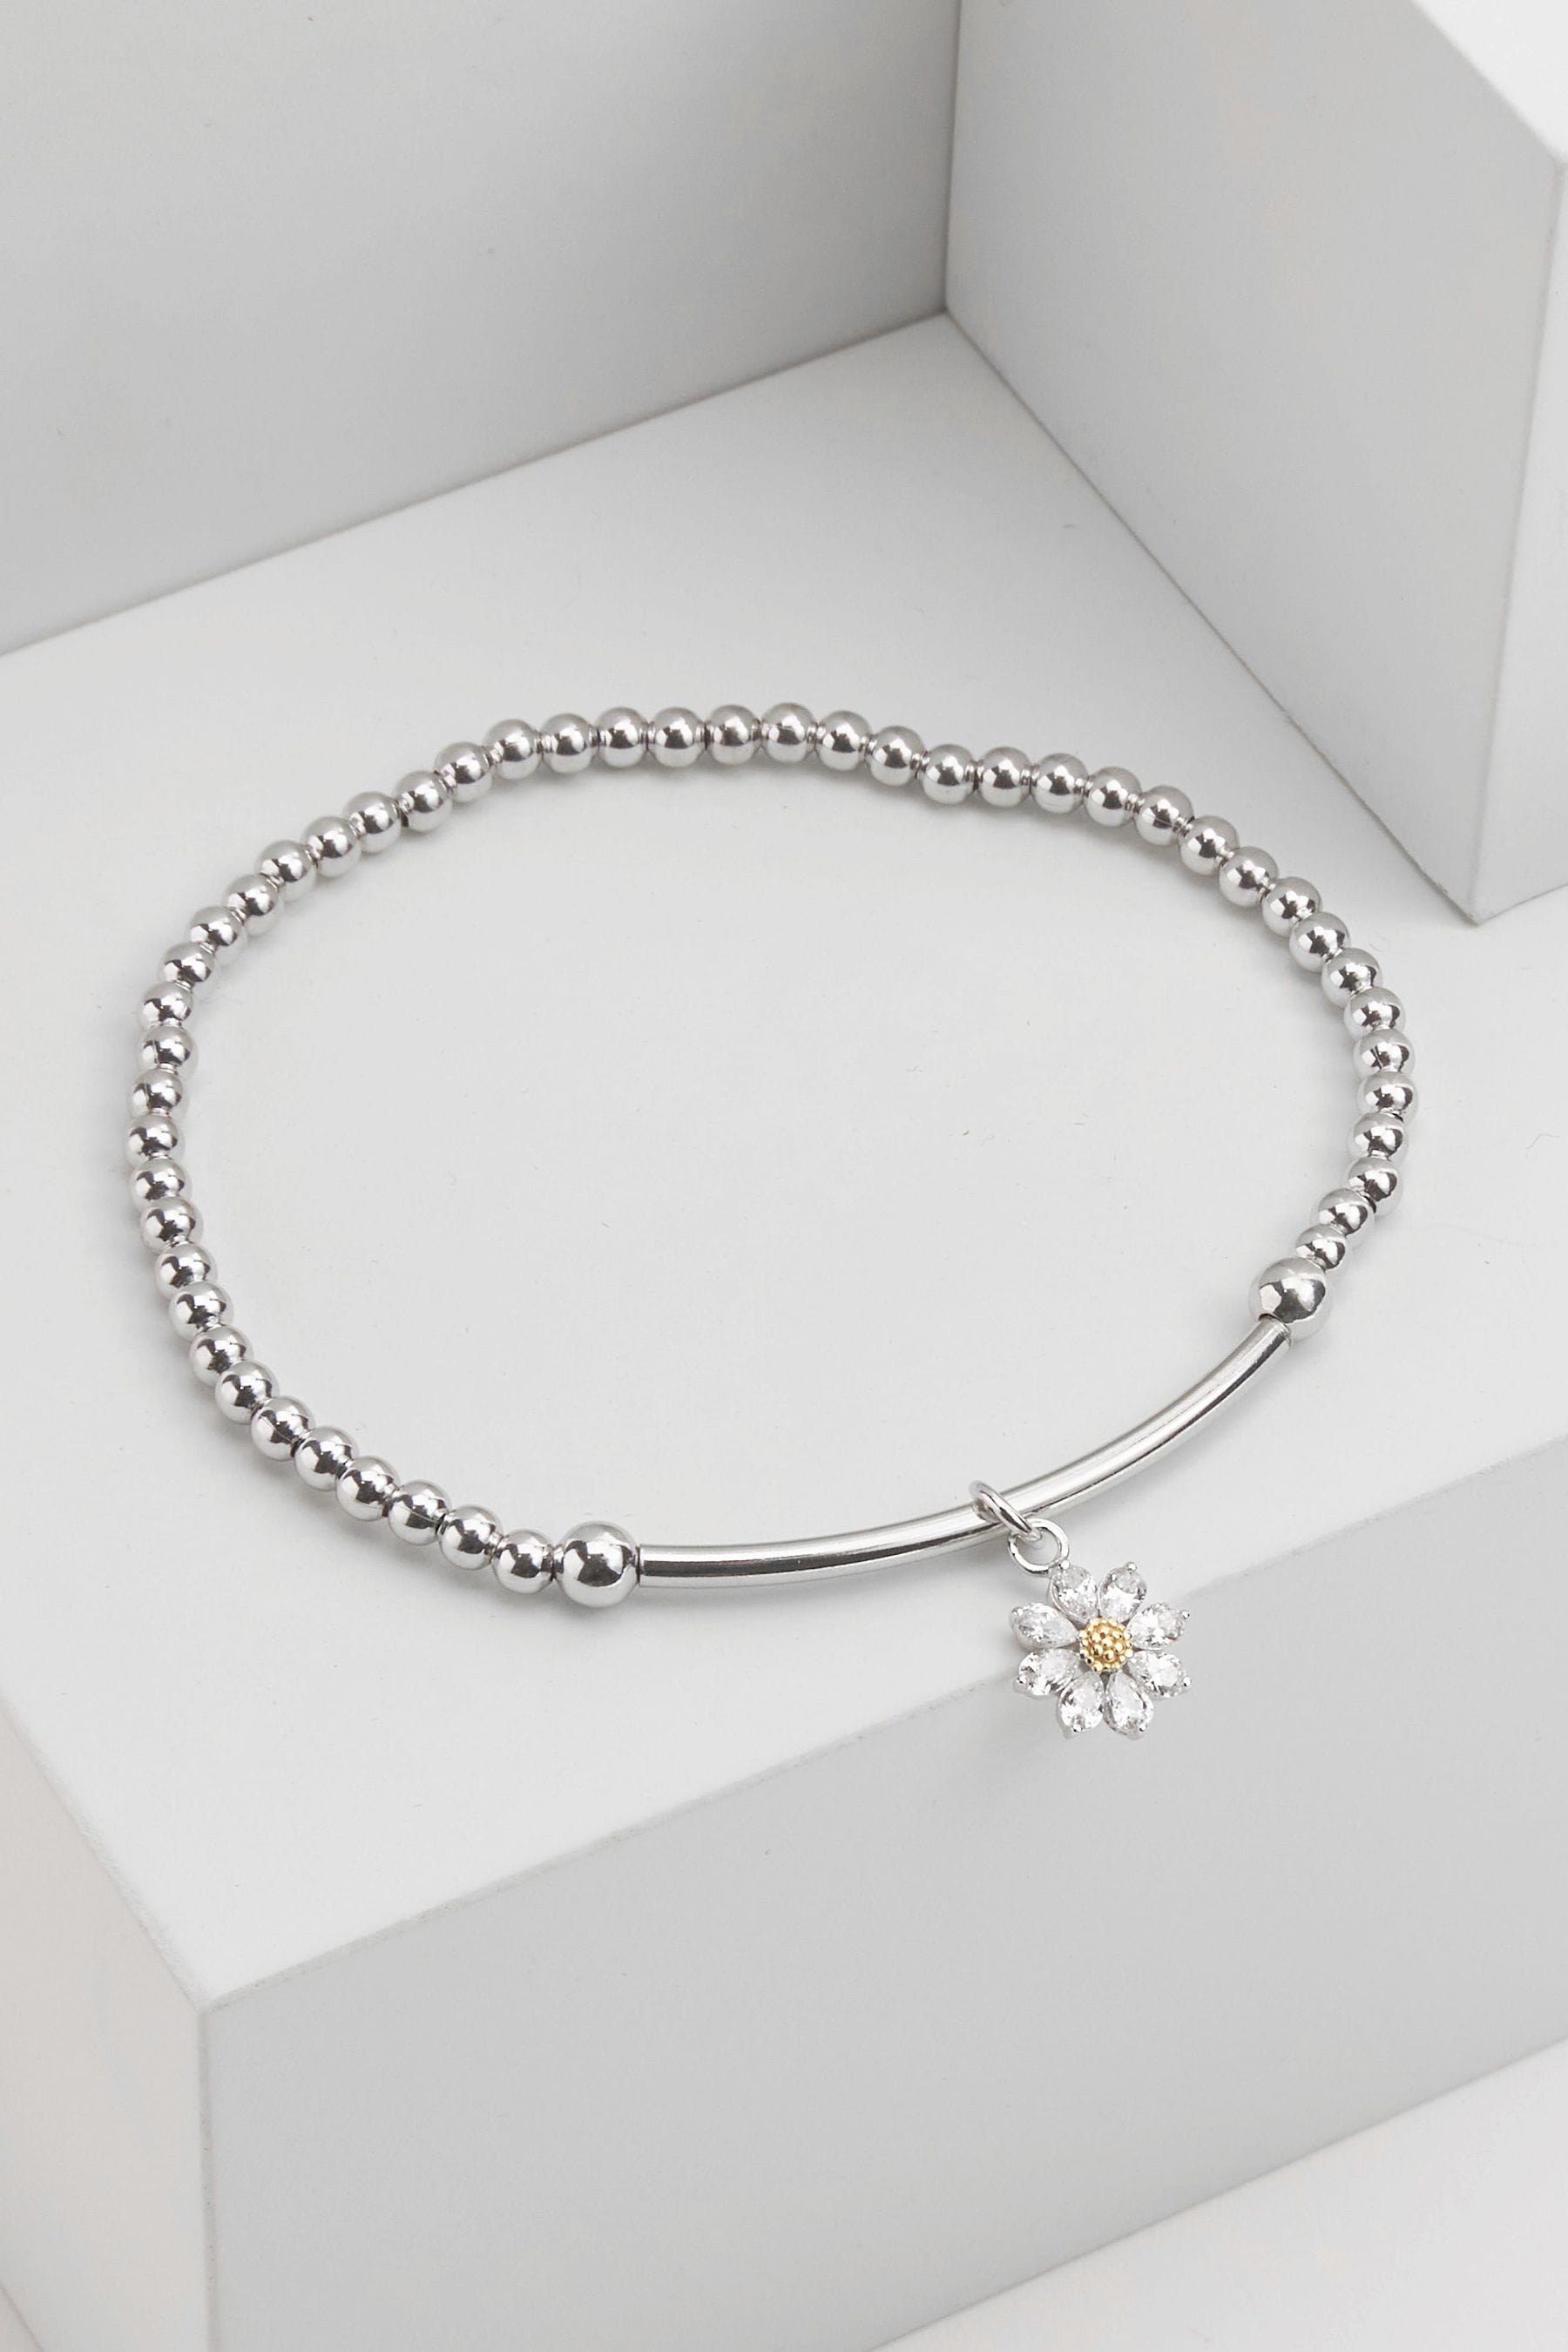 Daisy Flower Sterling Silver and Gold Plated Bracelet  NinaBreddal